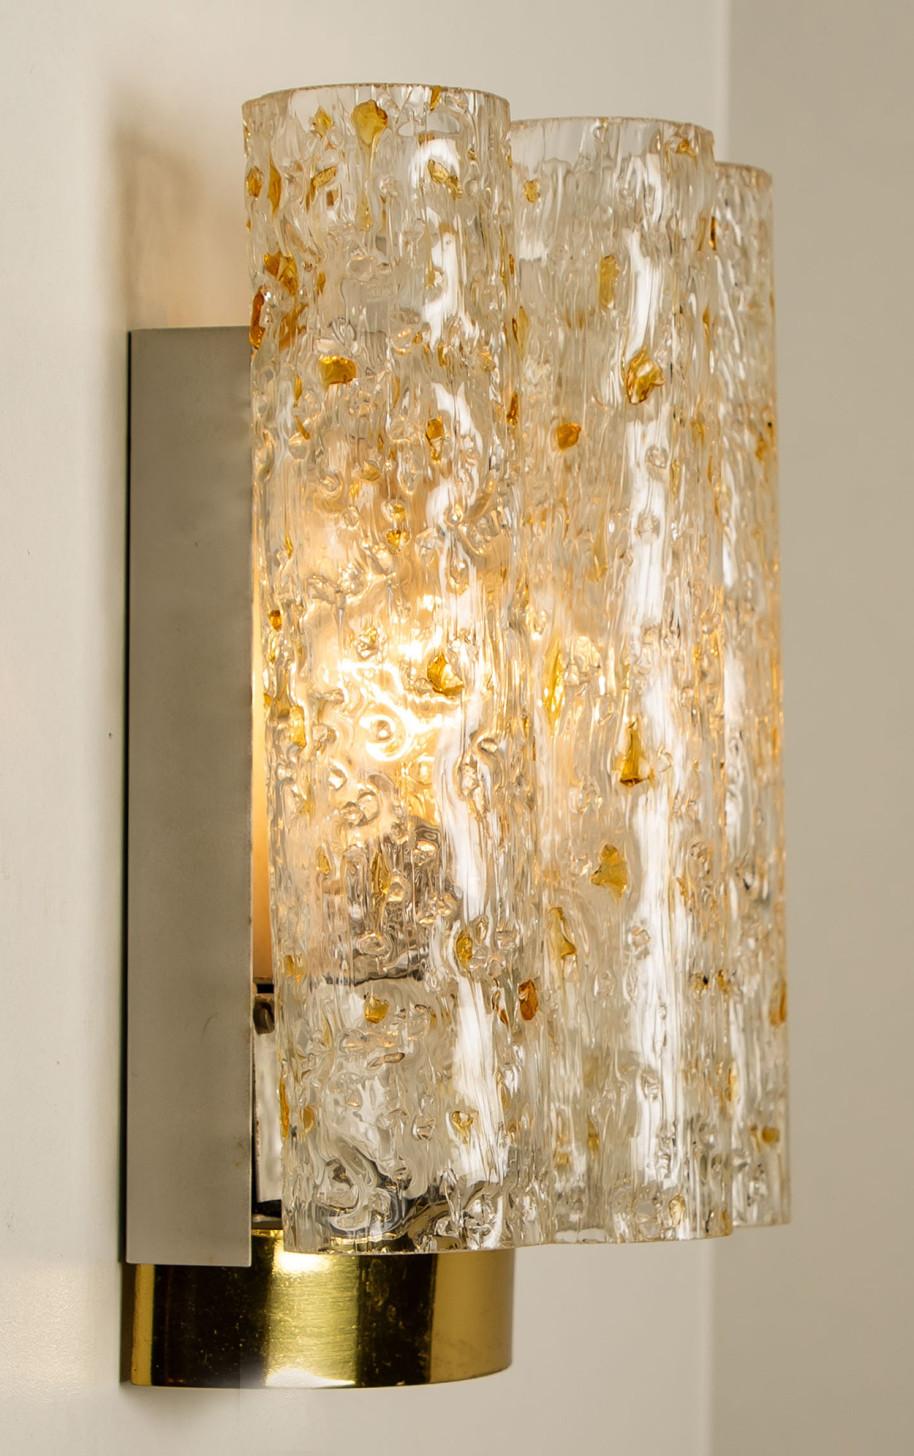 Mid-20th Century Speckled Tubes Wall Lights by Doria Leuchten, 1960s For Sale